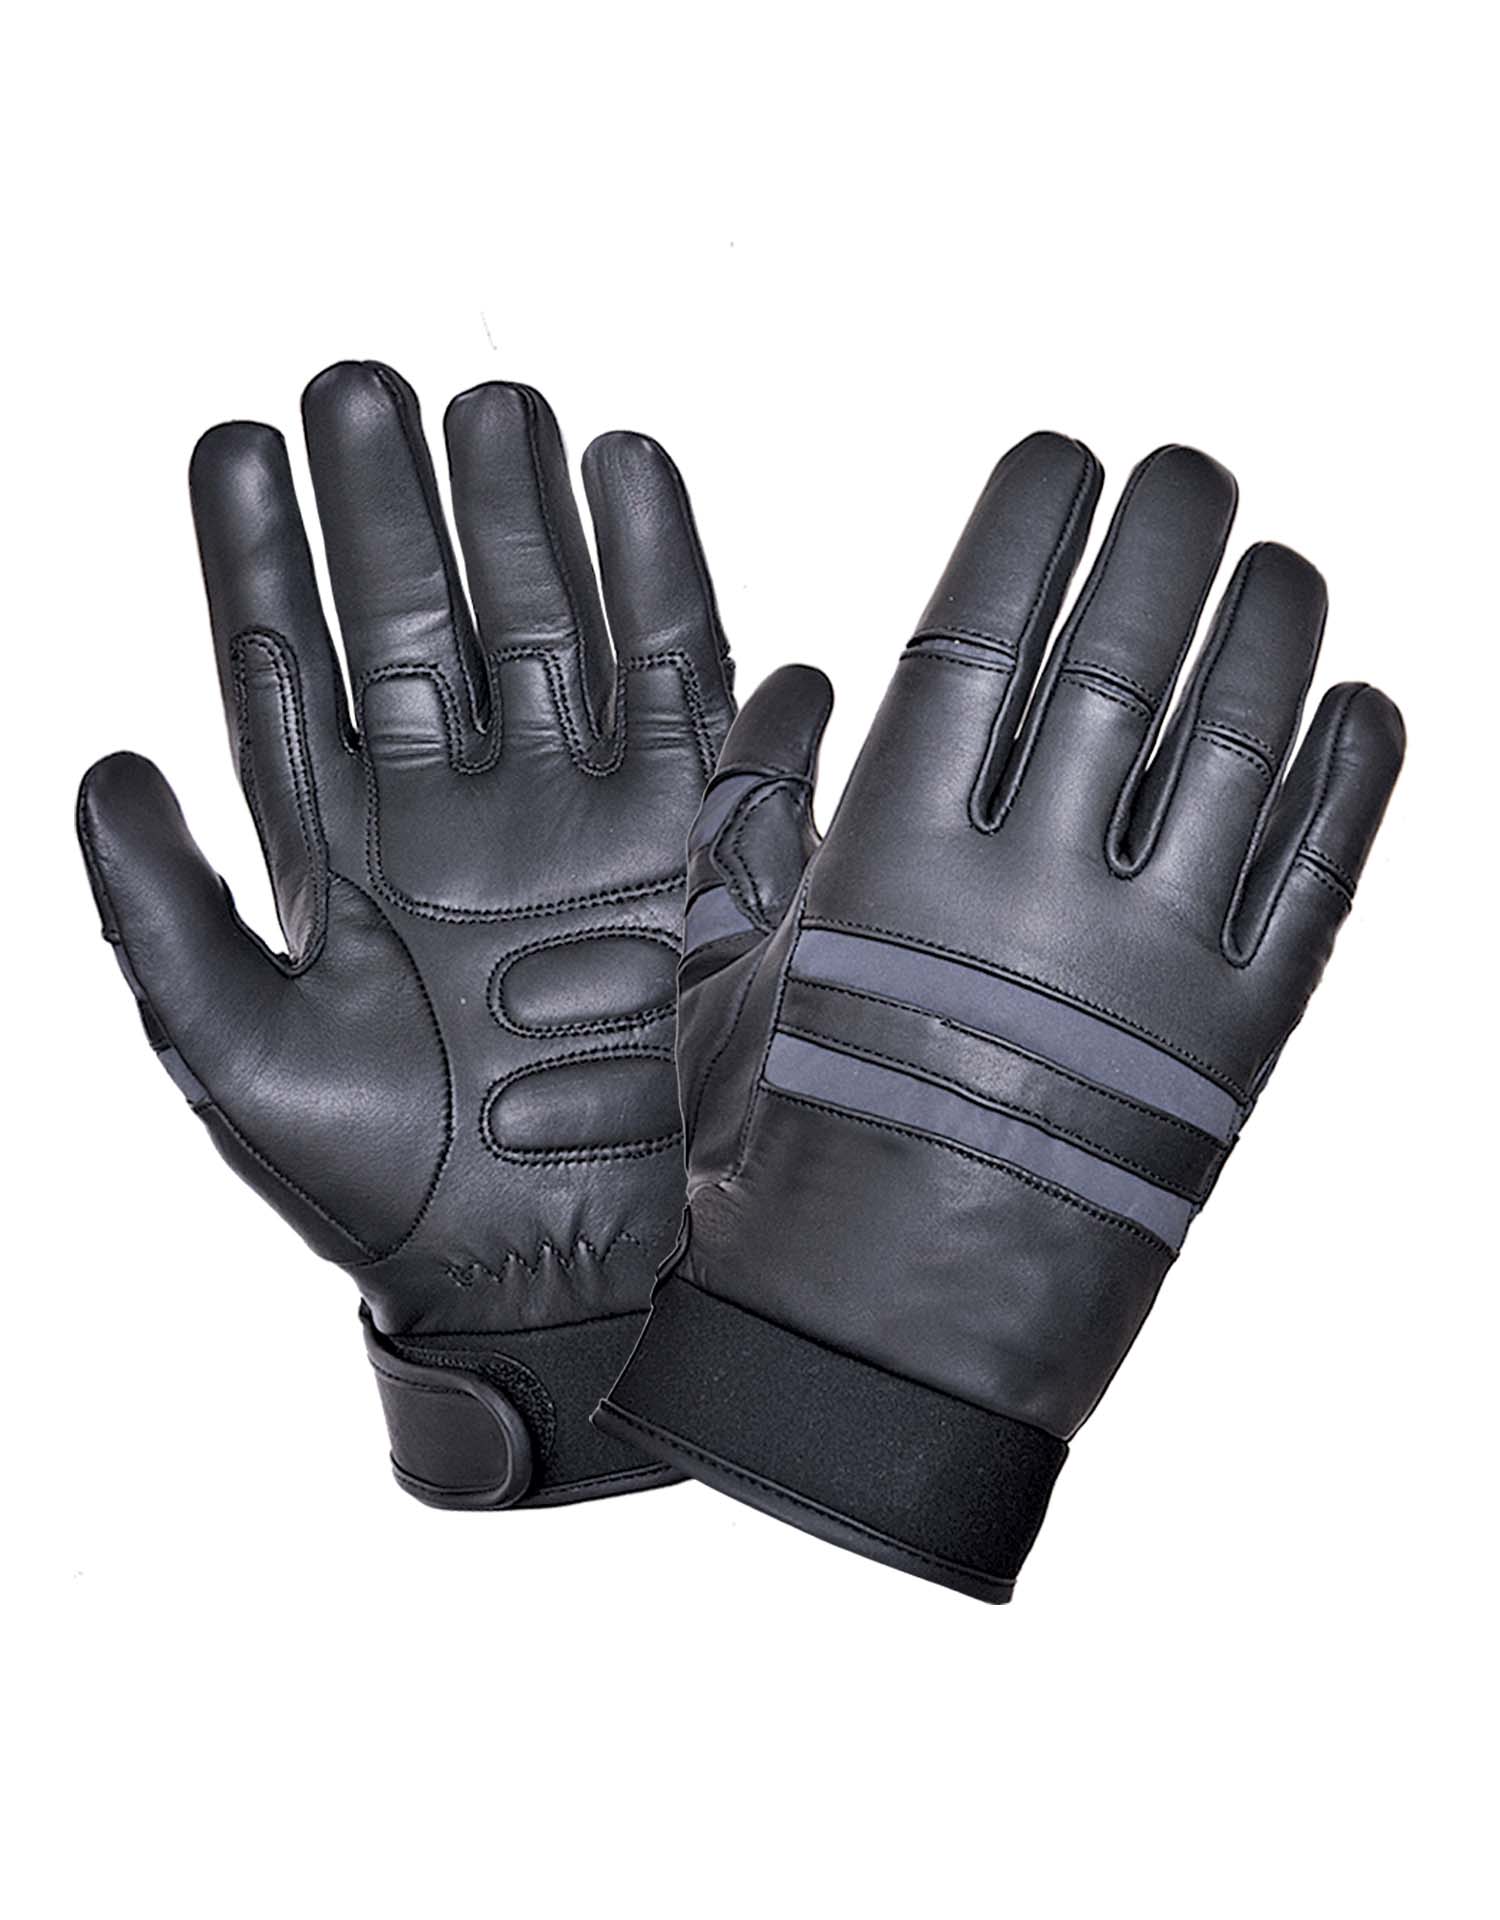 Black Full Finger Leather Gloves, Gel palm, Reflective (Size: Small)